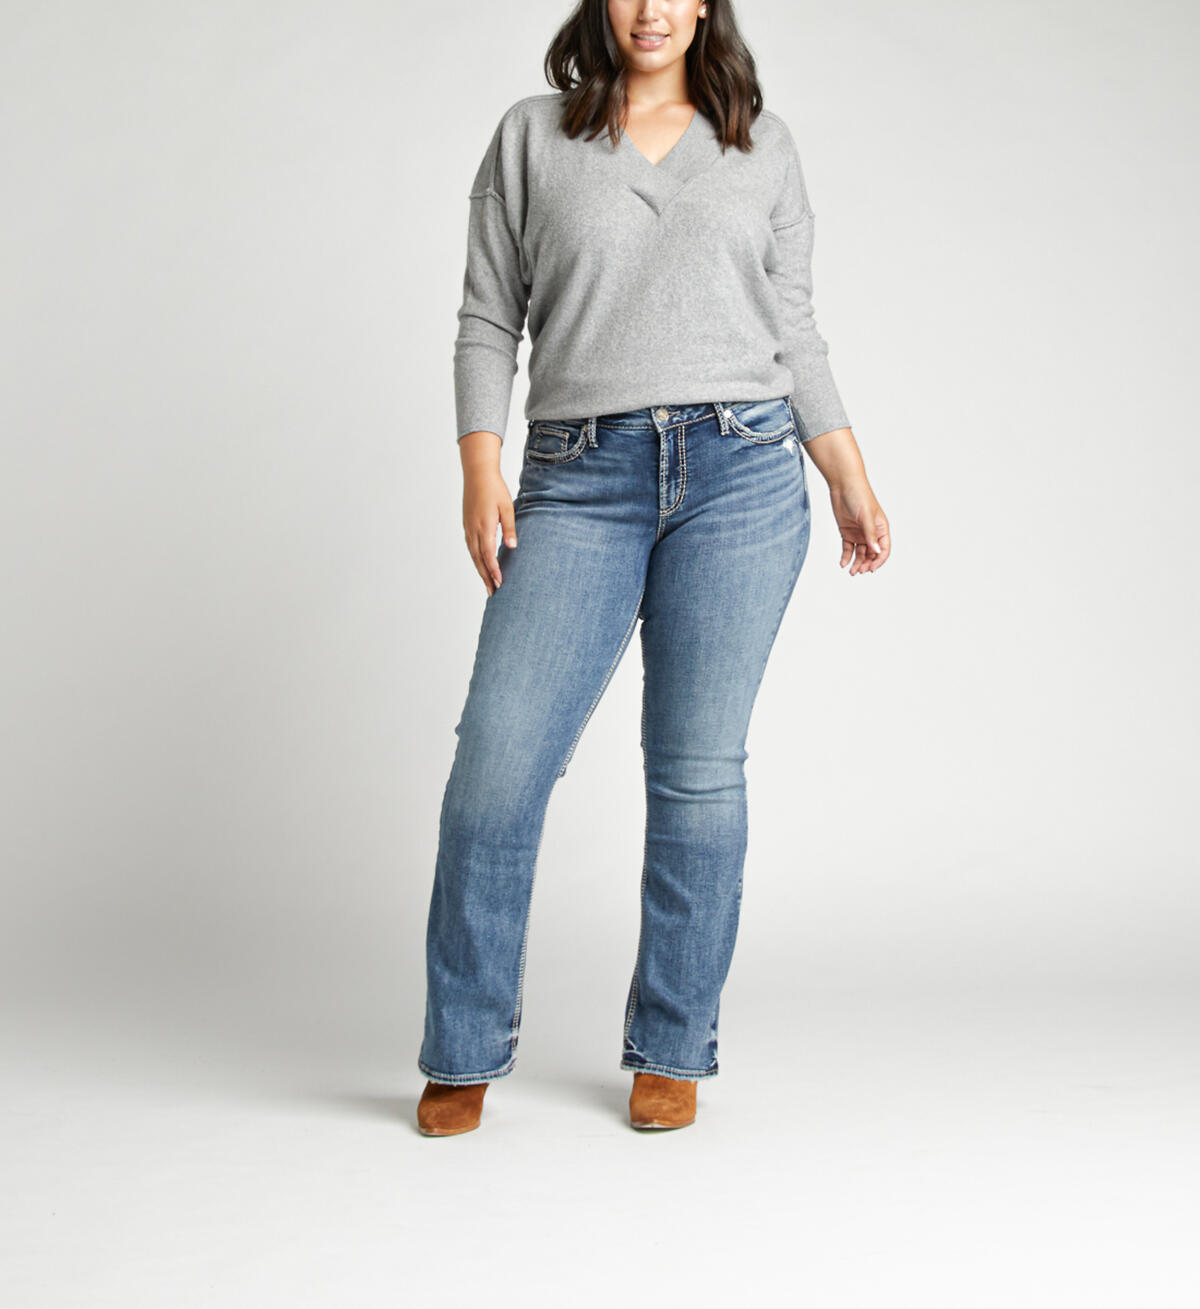 Elyse Mid Rise Bootcut Plus Size Jeans, , hi-res image number 3